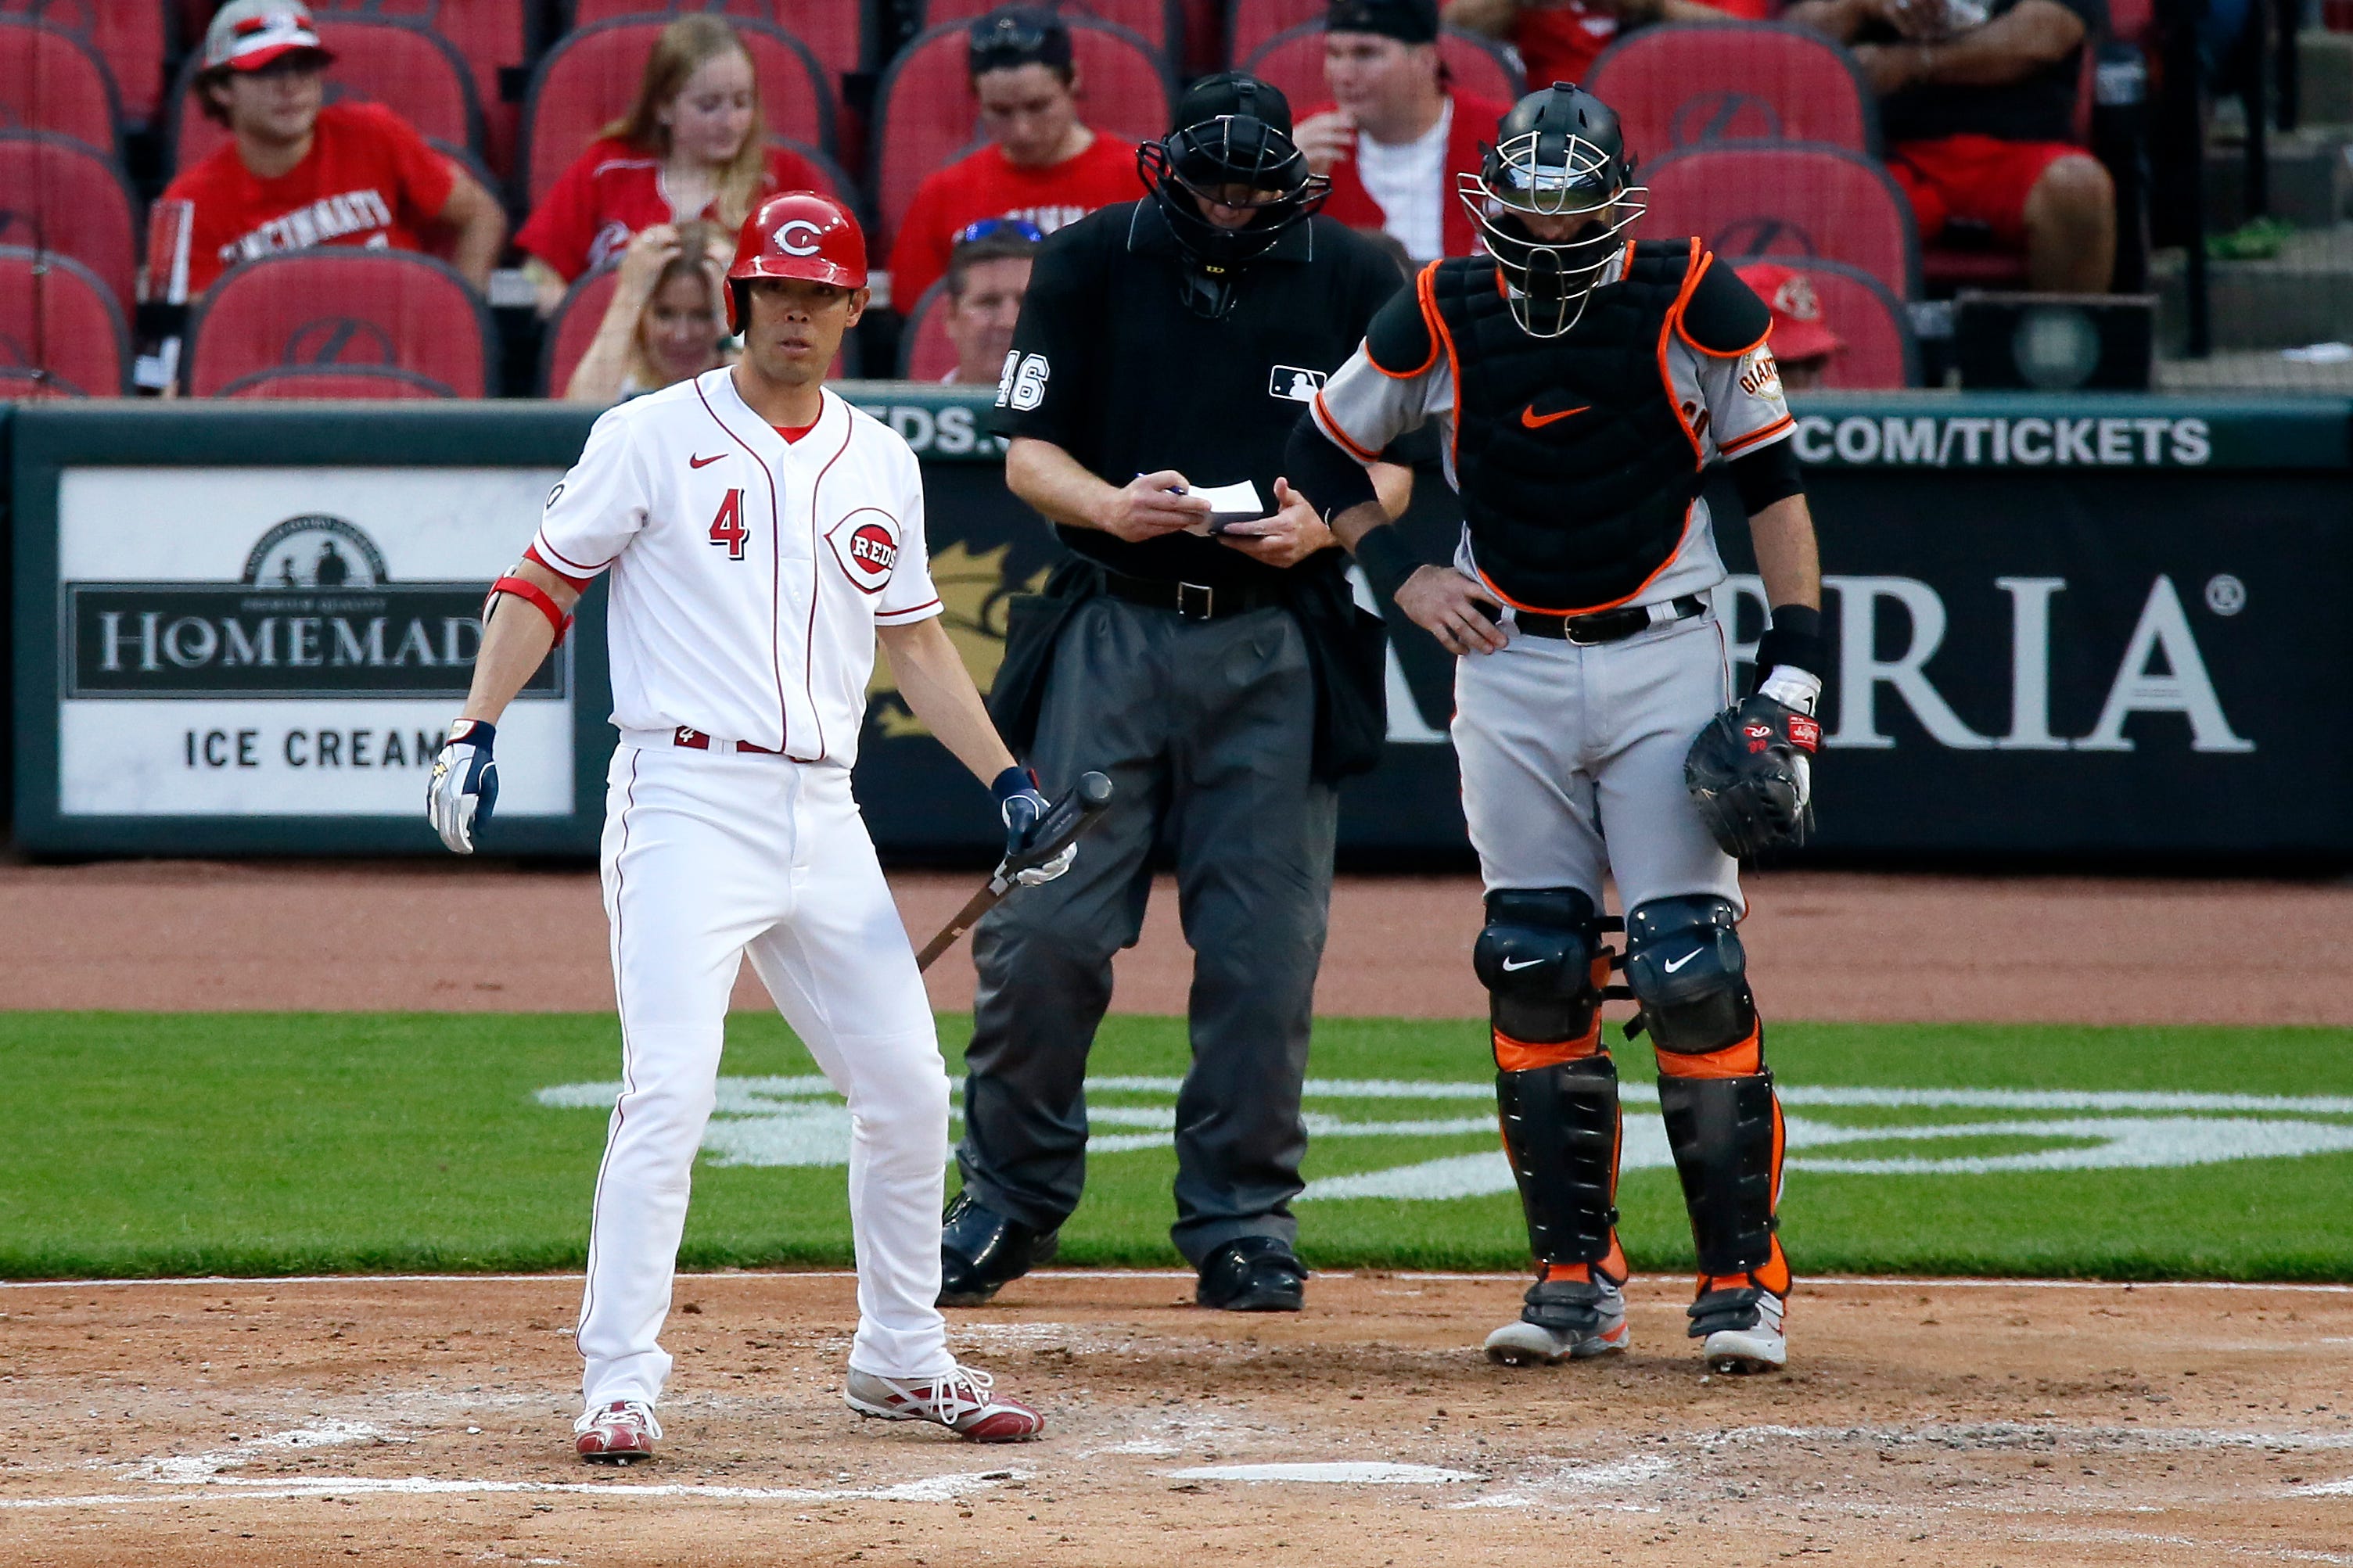 Arroyo's debut as Reds' radio analyst? Miley's no-hitter in Cleveland